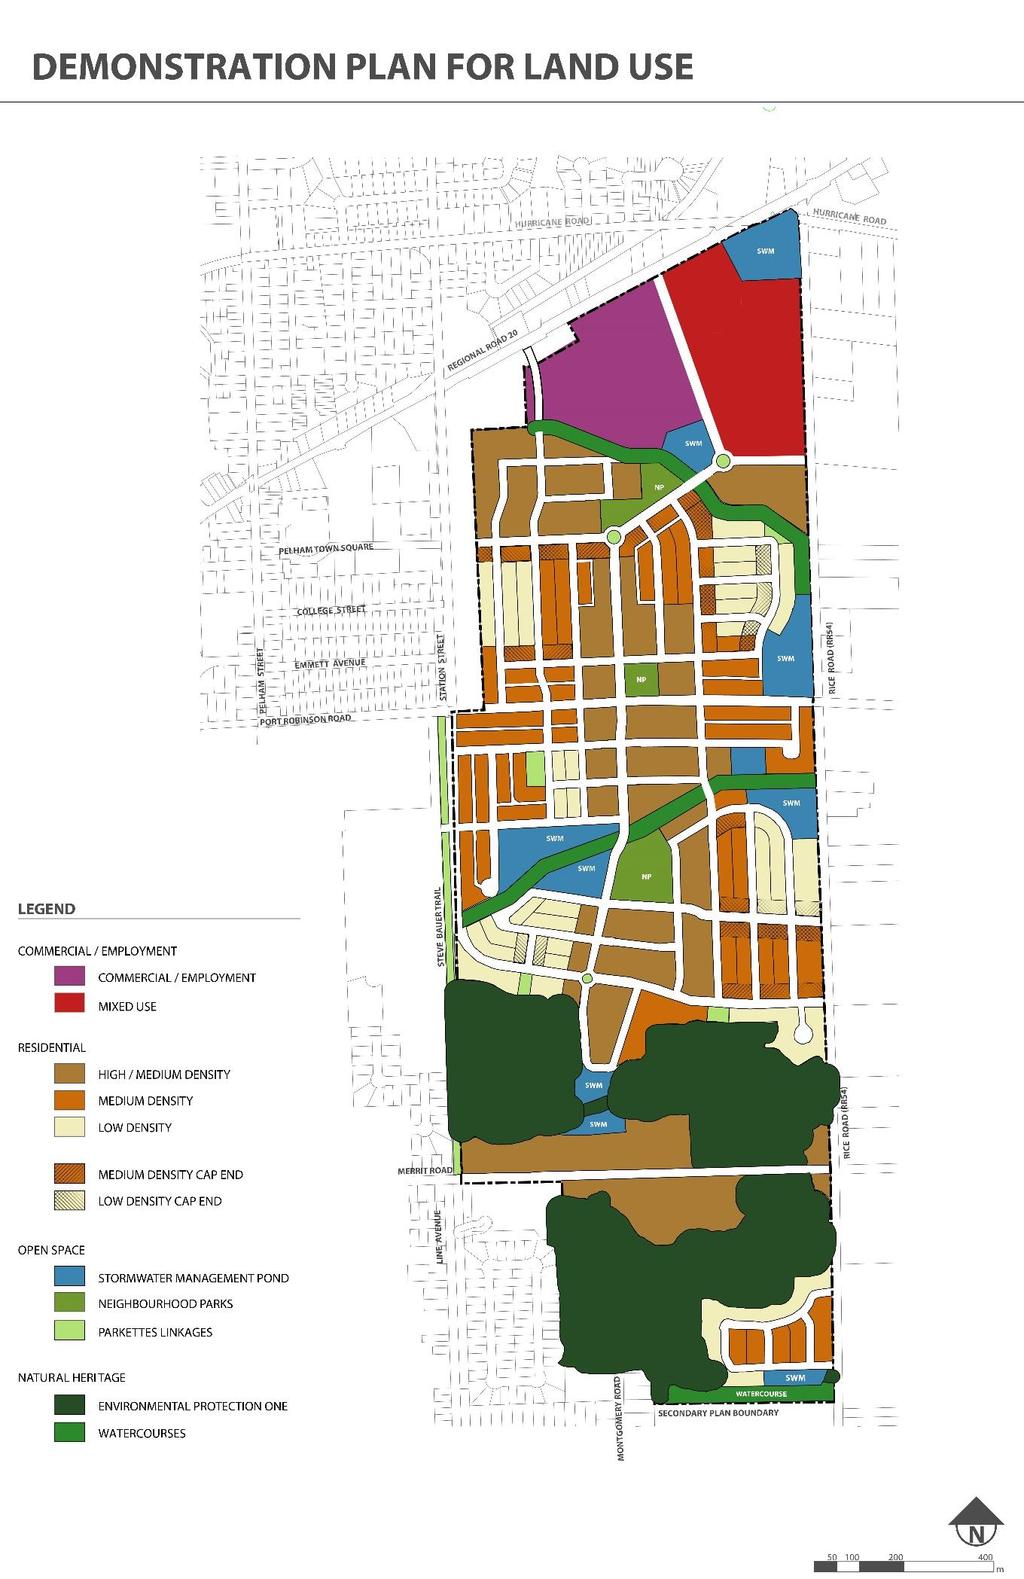 DEMONSTRATION PLAN FOR LAND USE: 50 PERSONS + JOBS / HECTARE DEMONSTRATION PLAN FOR LAND USE: 80 PERSONS + JOBS / HECTARE Residential Lands Percentage of Residential Lands High / Medium